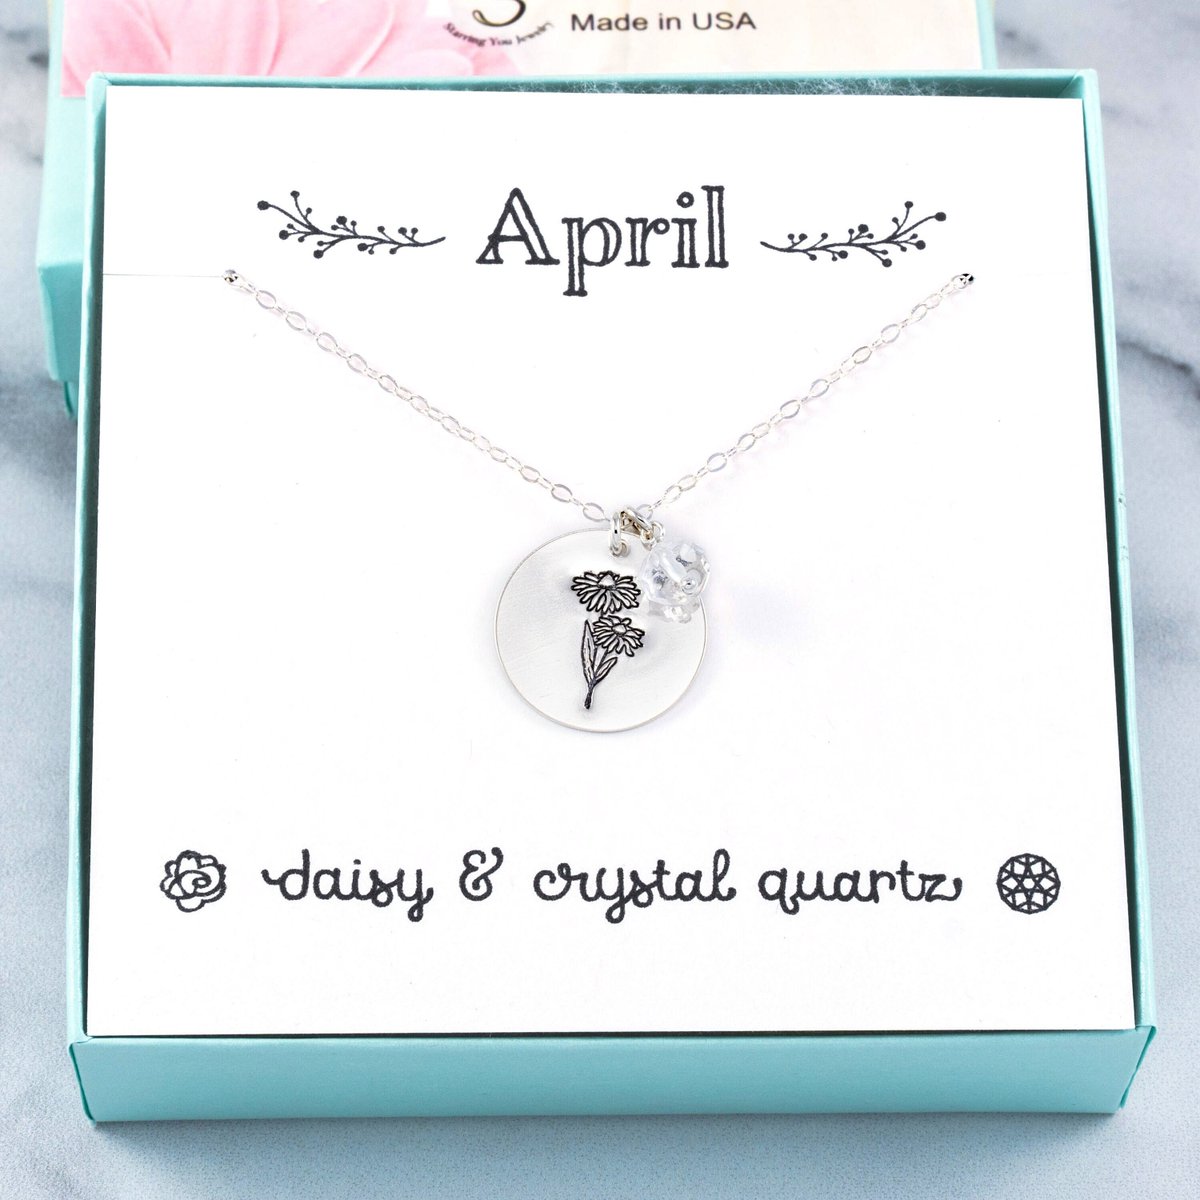 April Birth Flower Birthstone Necklace, personalized birthday gift, daisy, clear crystal quartz, customized initial, silver, gold, rose gold tuppu.net/32f5e2b #Etsy #etsygifts #etsyshop #shopsmall #etsyjewelry #etsyfinds #giftsforher